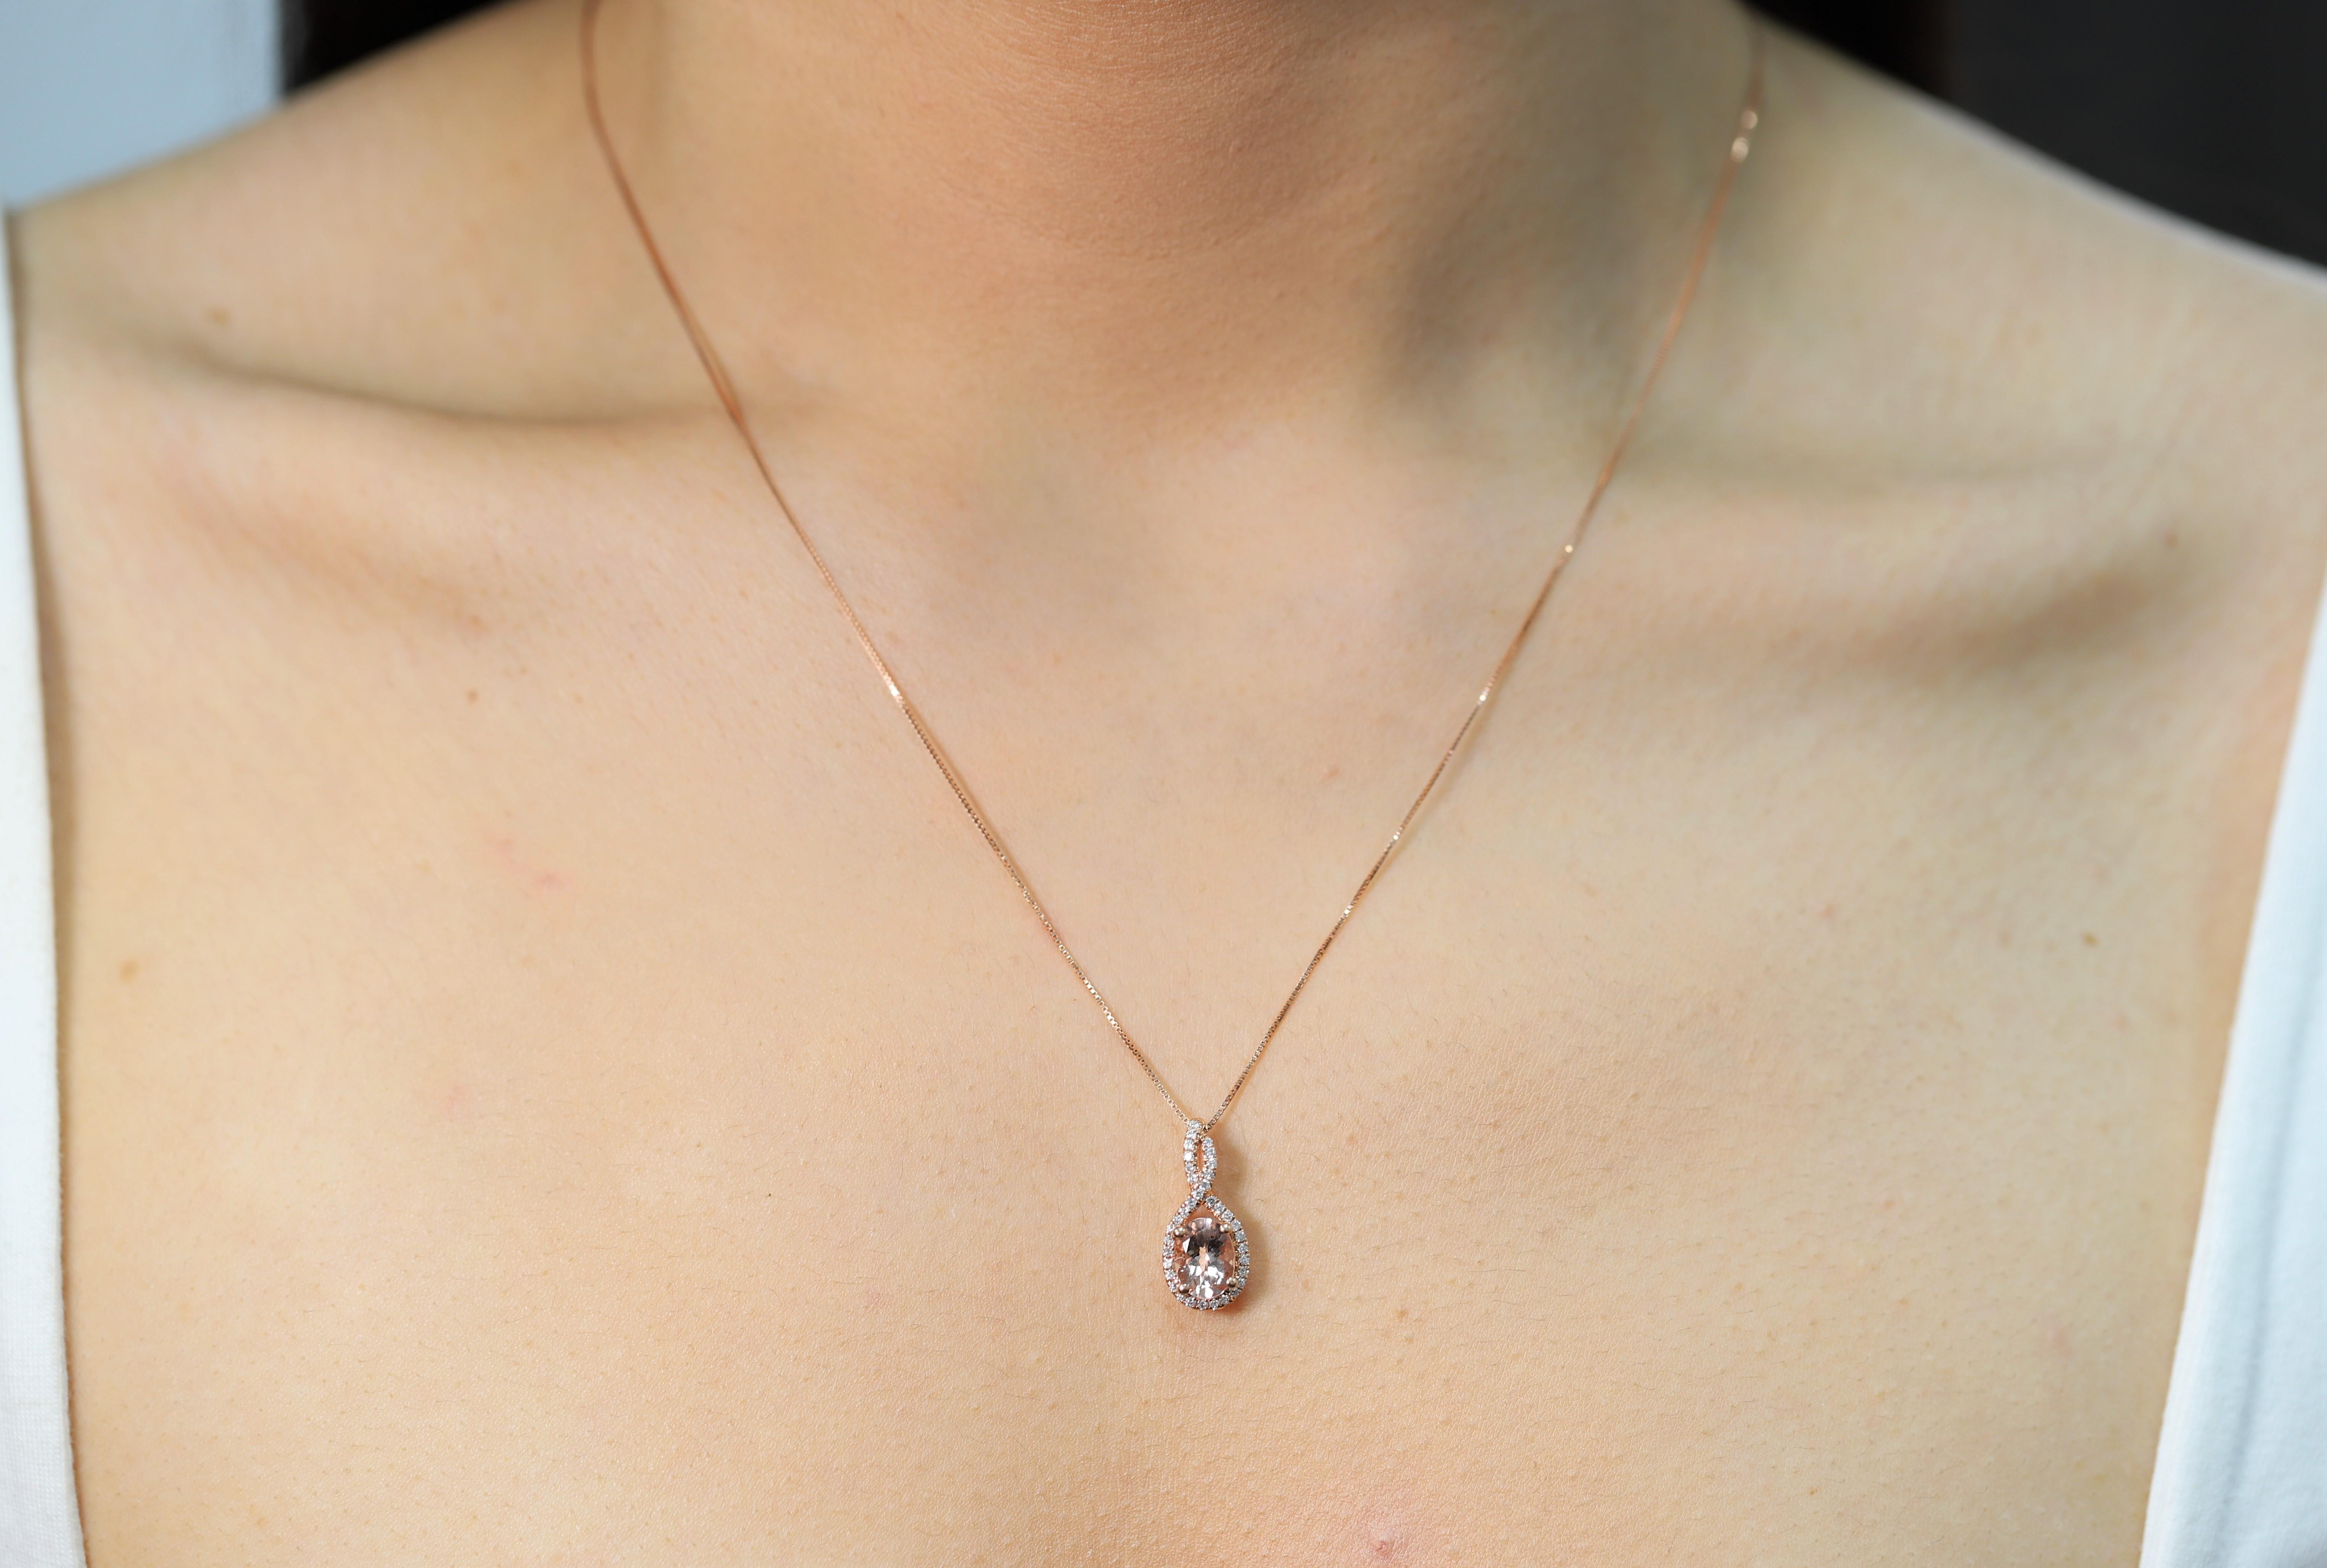 Decorate yourself in elegance with this Pendant is crafted from 10-karat Rose Gold by Gin & Grace Pendant. This Pendant is made up of 6X8 Oval-Cut Prong setting Genuine Genuine Morganite (1 Pcs) 1.07 Carat and Round-Cut Prong setting Natural White